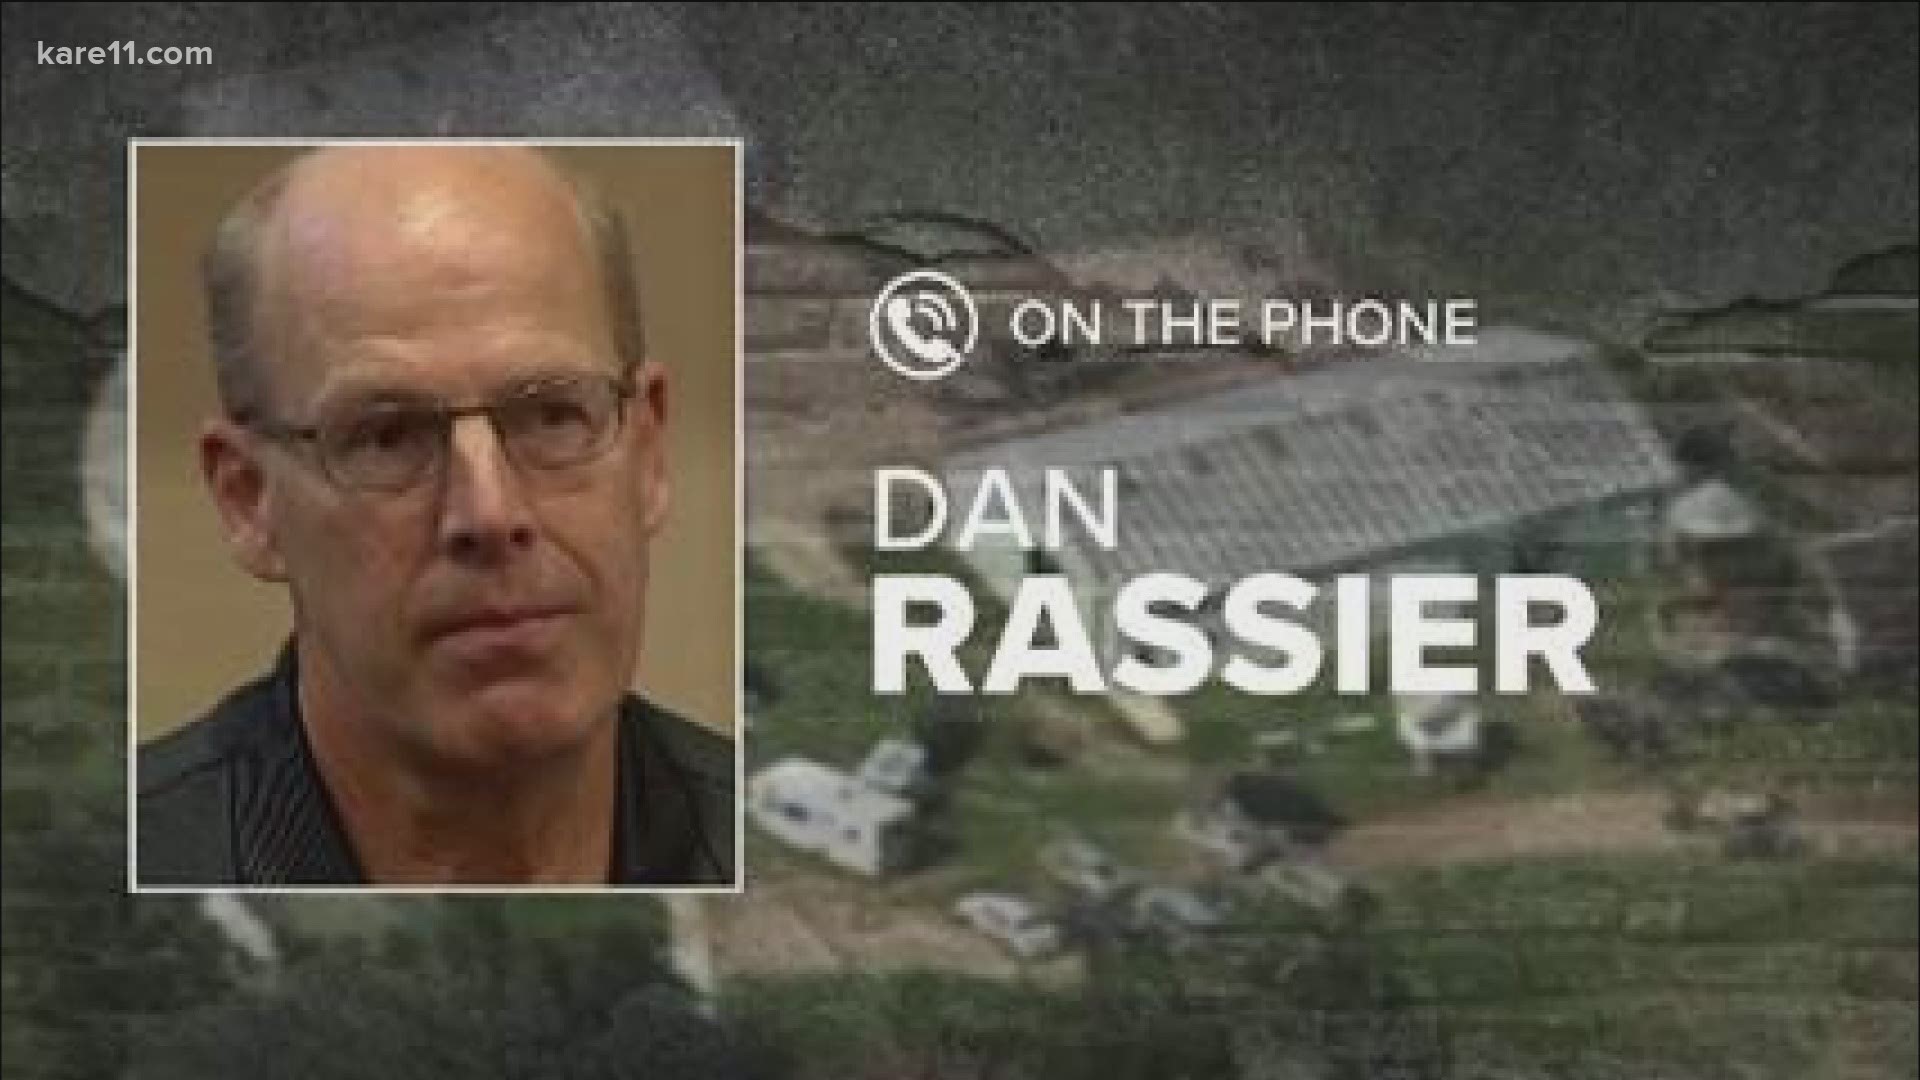 Because of a statute of limitations, Dan Rassier is virtually out of legal options in his case against investigators.